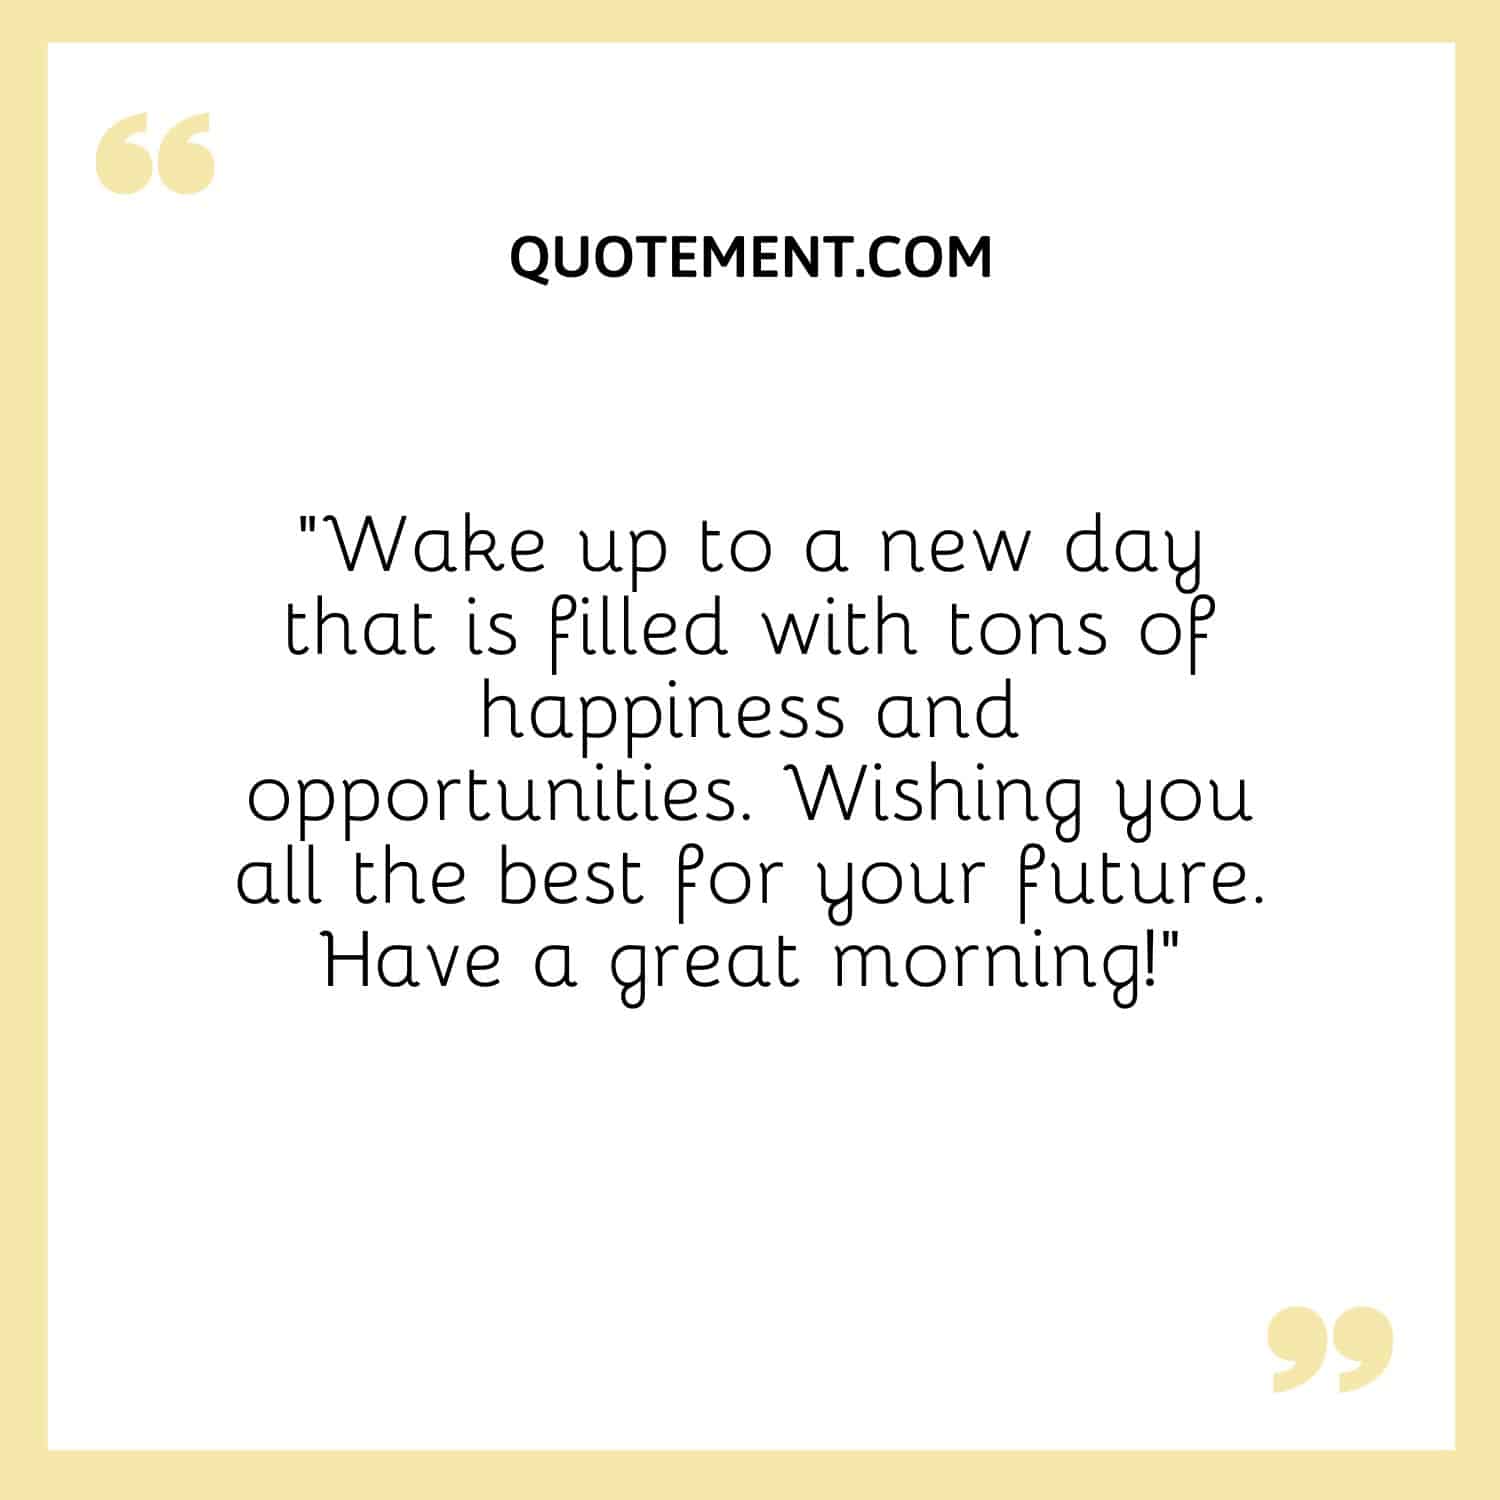 Wake up to a new day that is filled with tons of happiness and opportunities